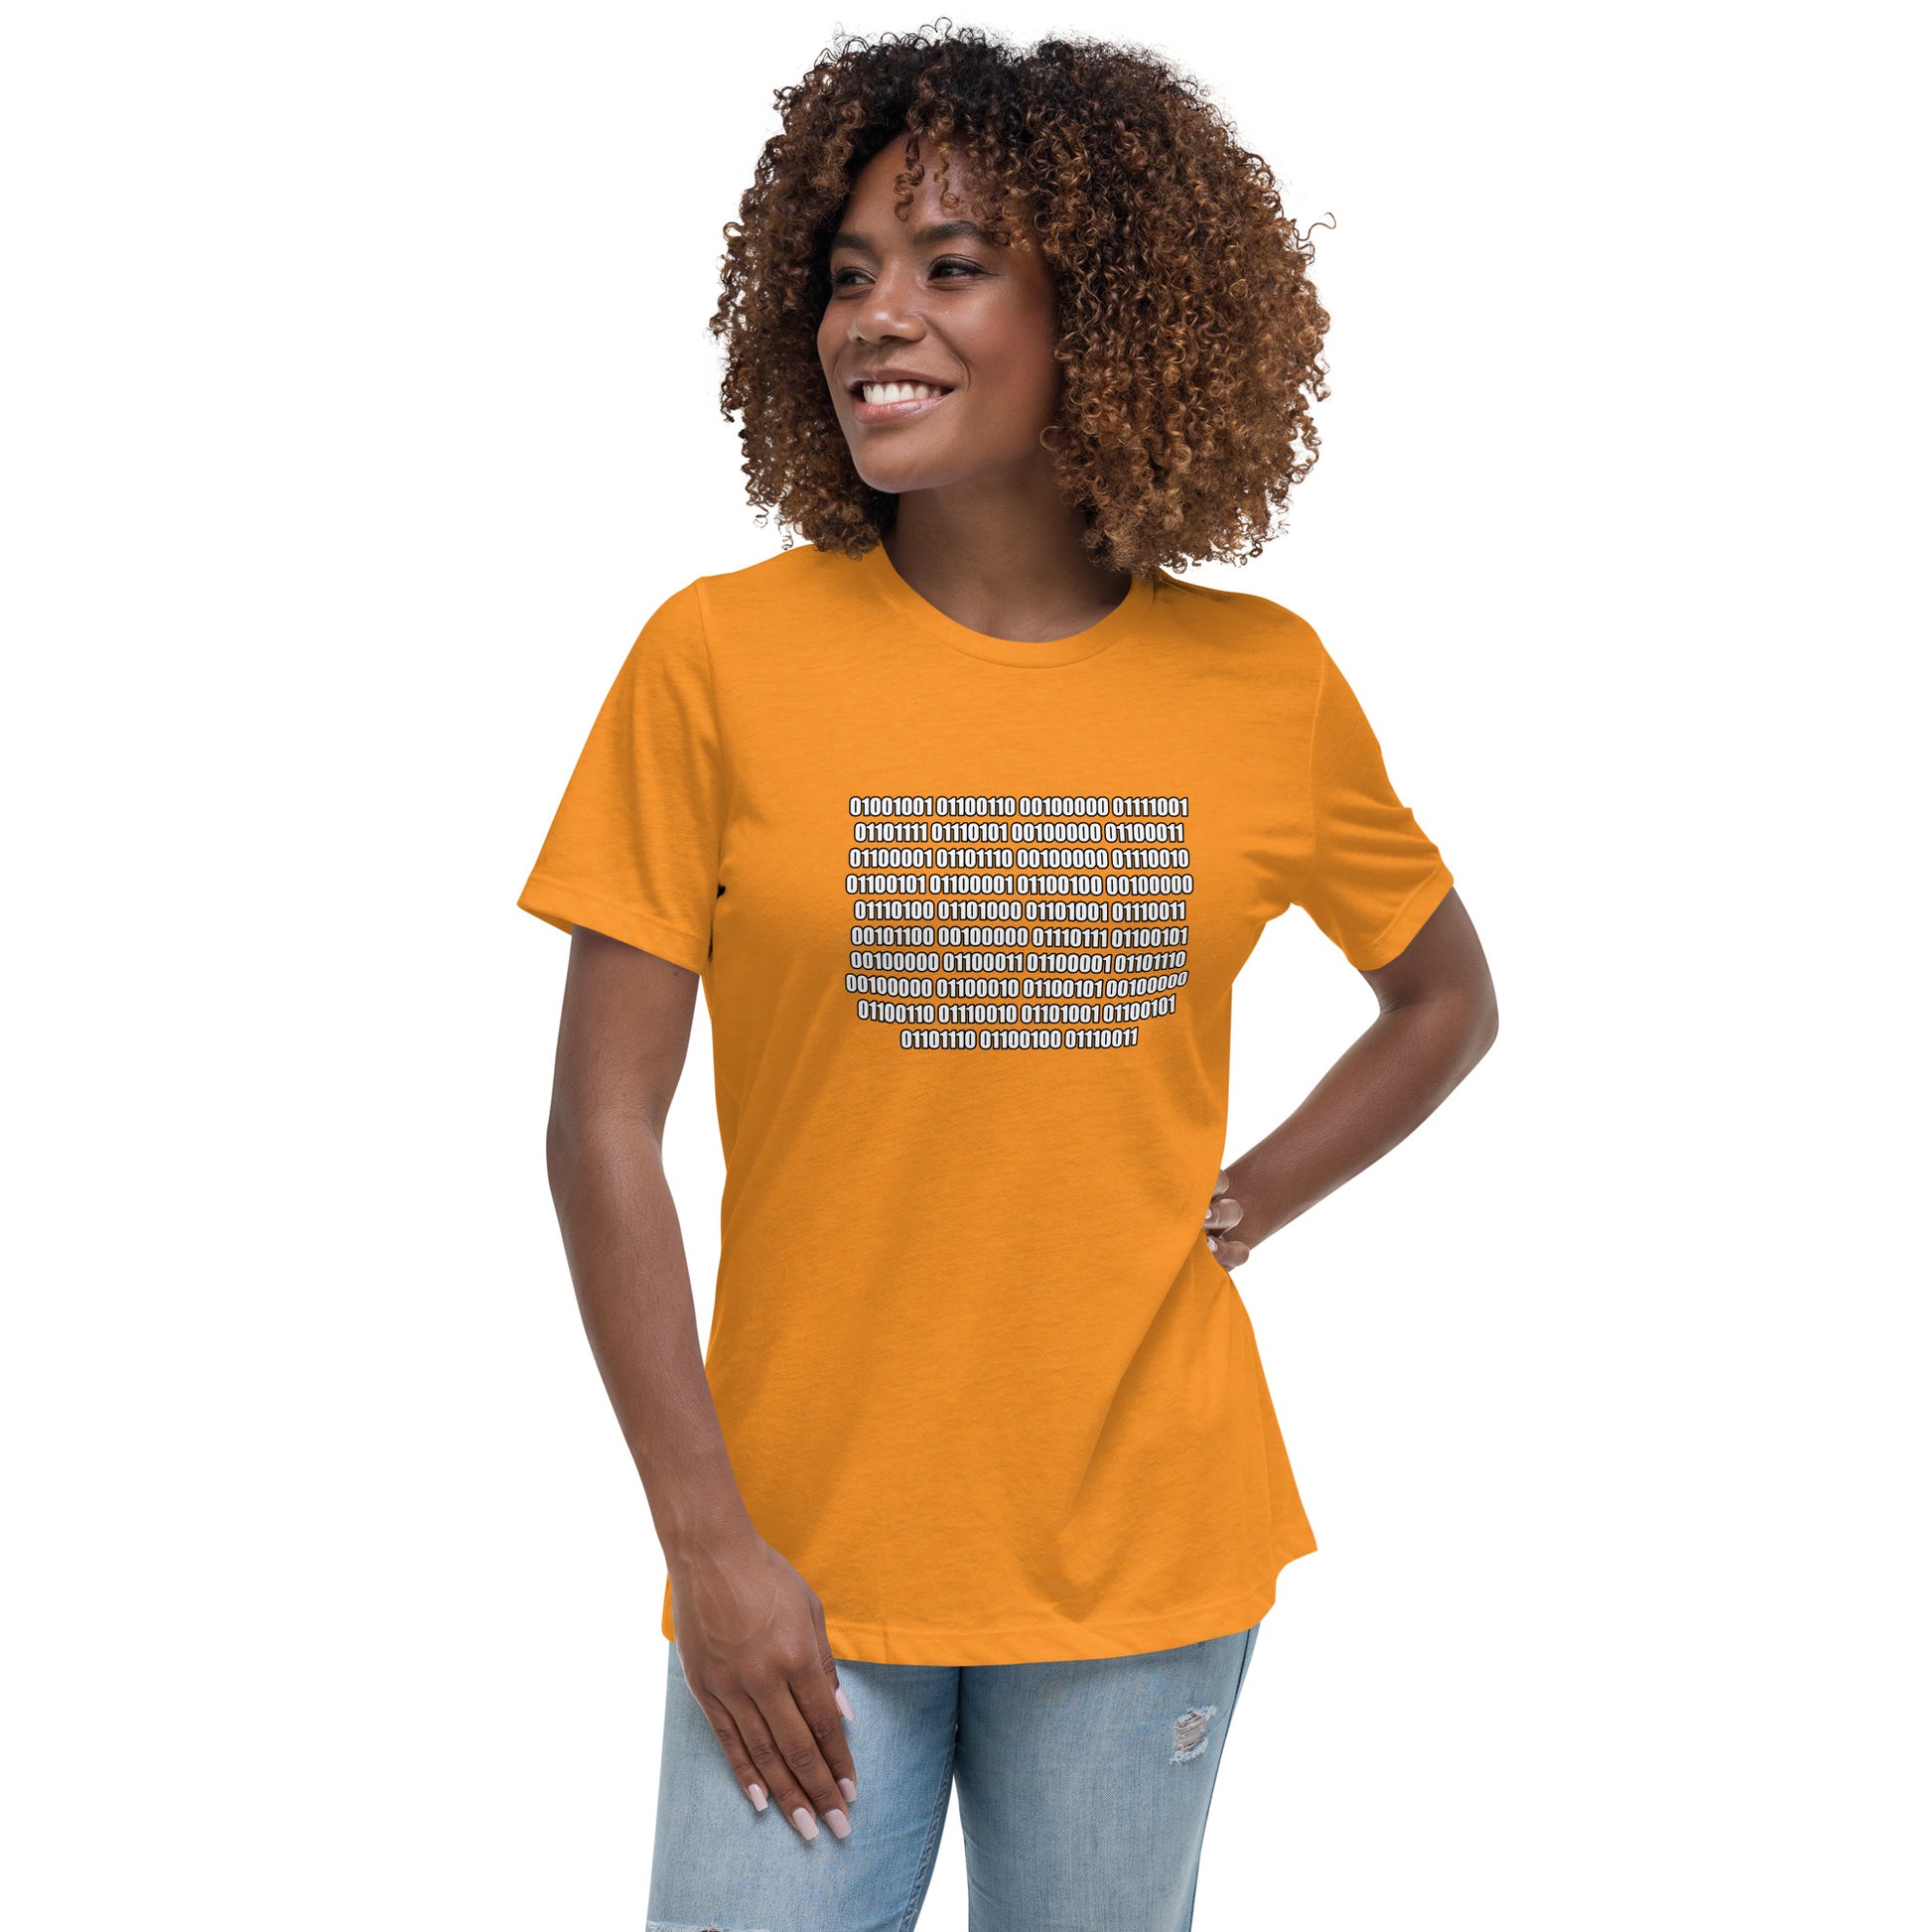 Woman with marmalade t-shirt with binary code "If you can read this"